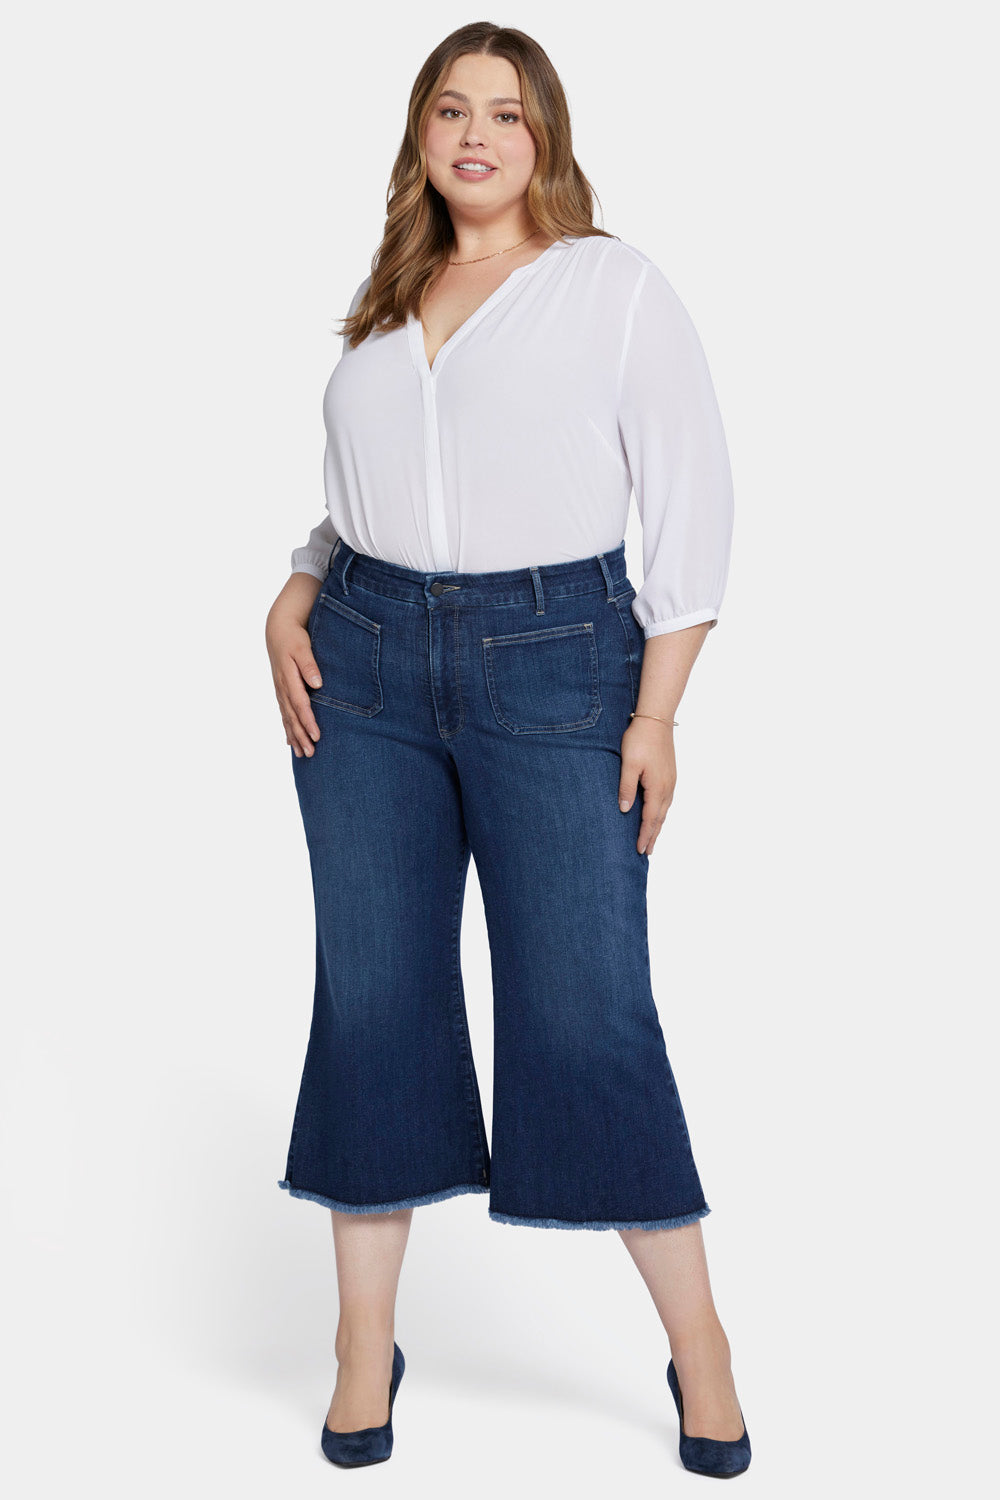 Plus Size Washed Blue Denim Jeans With Ripped Holes Flare Pants For  Fall/Winter Bell Bottom Plus Size Flare Leggings Fashionable DHL Shipping  Style 5634 From Sell_clothing, $22.44